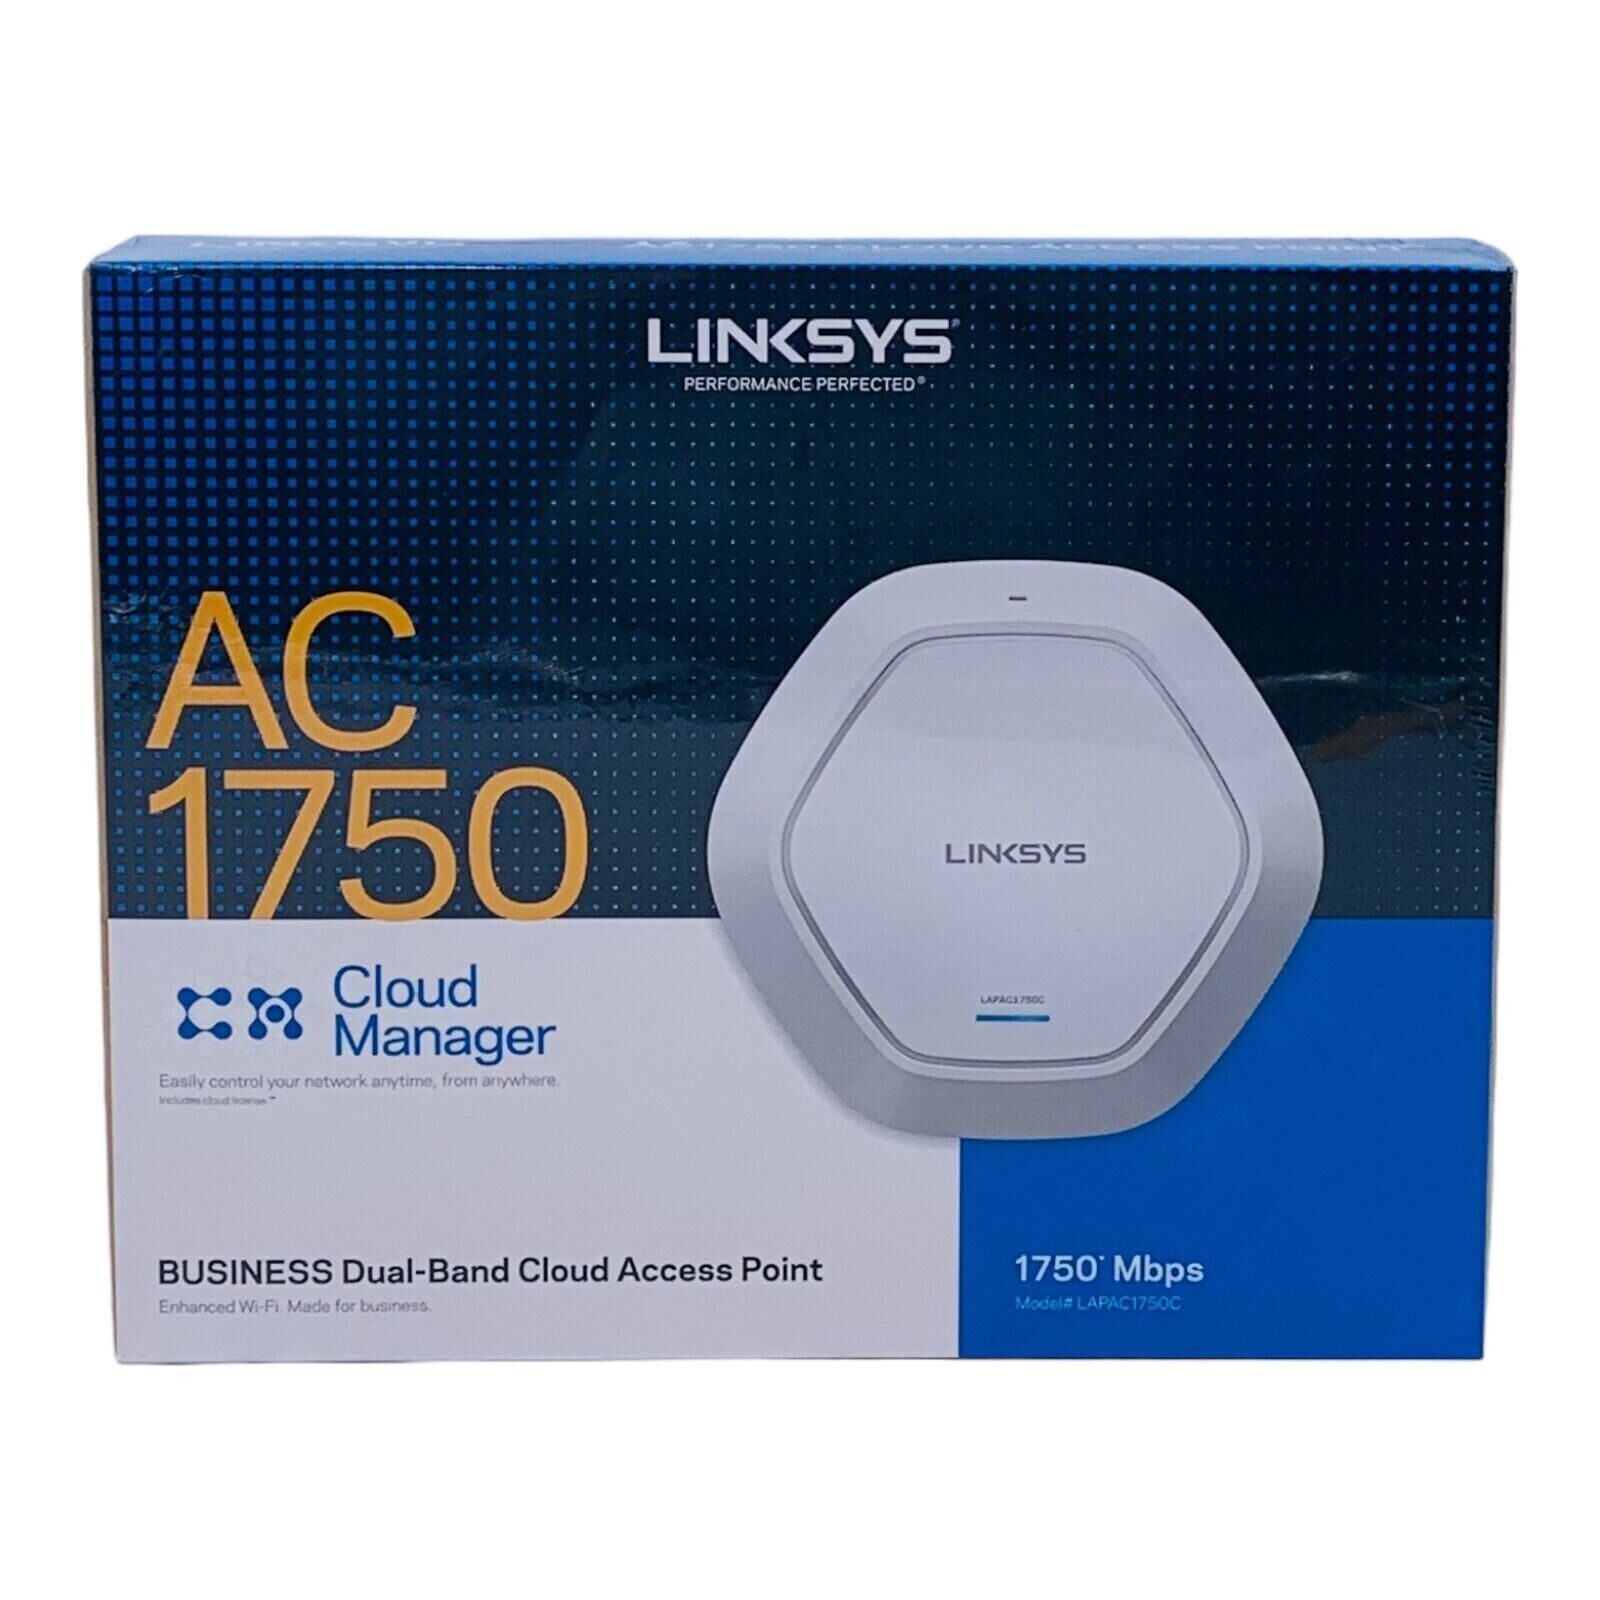 Linksys LAPAC1750C Business Dual-Band Cloud Access Point - Mint